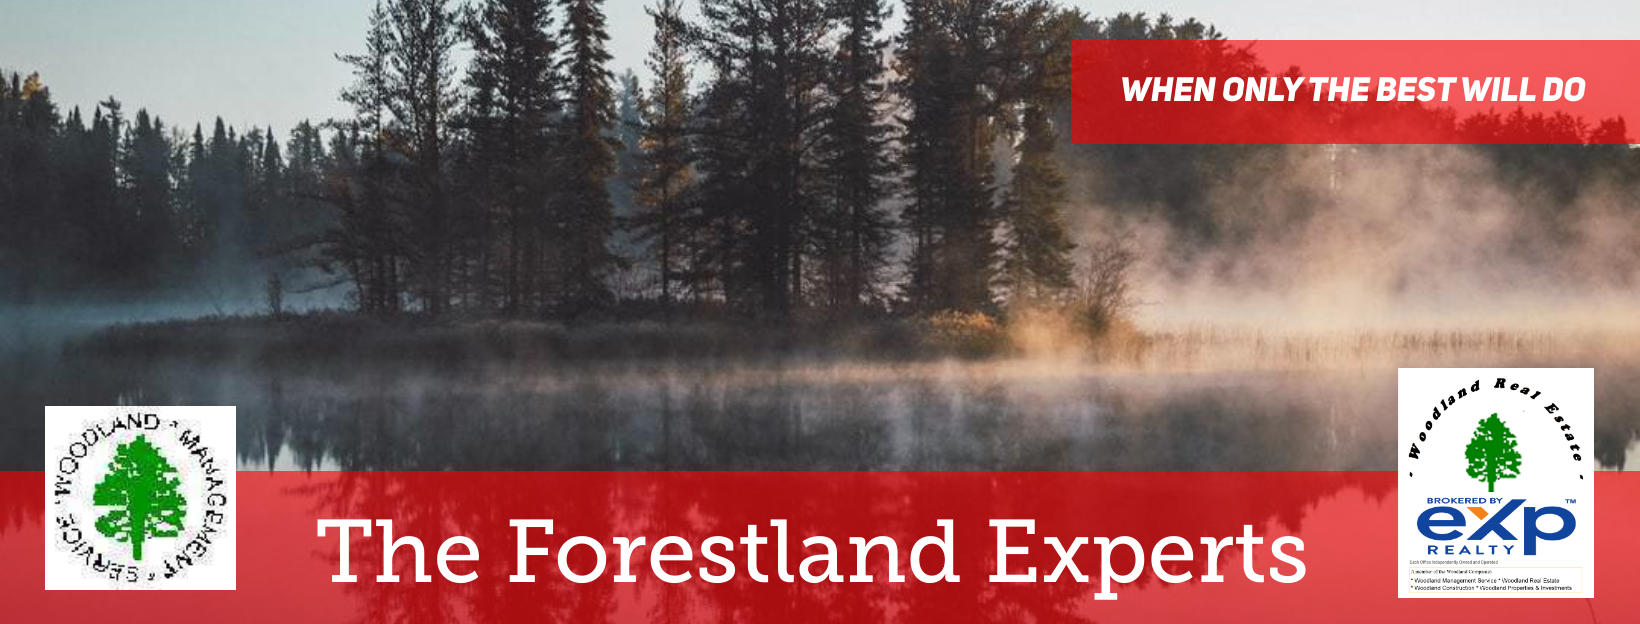 Forestland_Experts_When_only_the_best_will_do_1640x624-layout2326-1g99lbi_3_.png